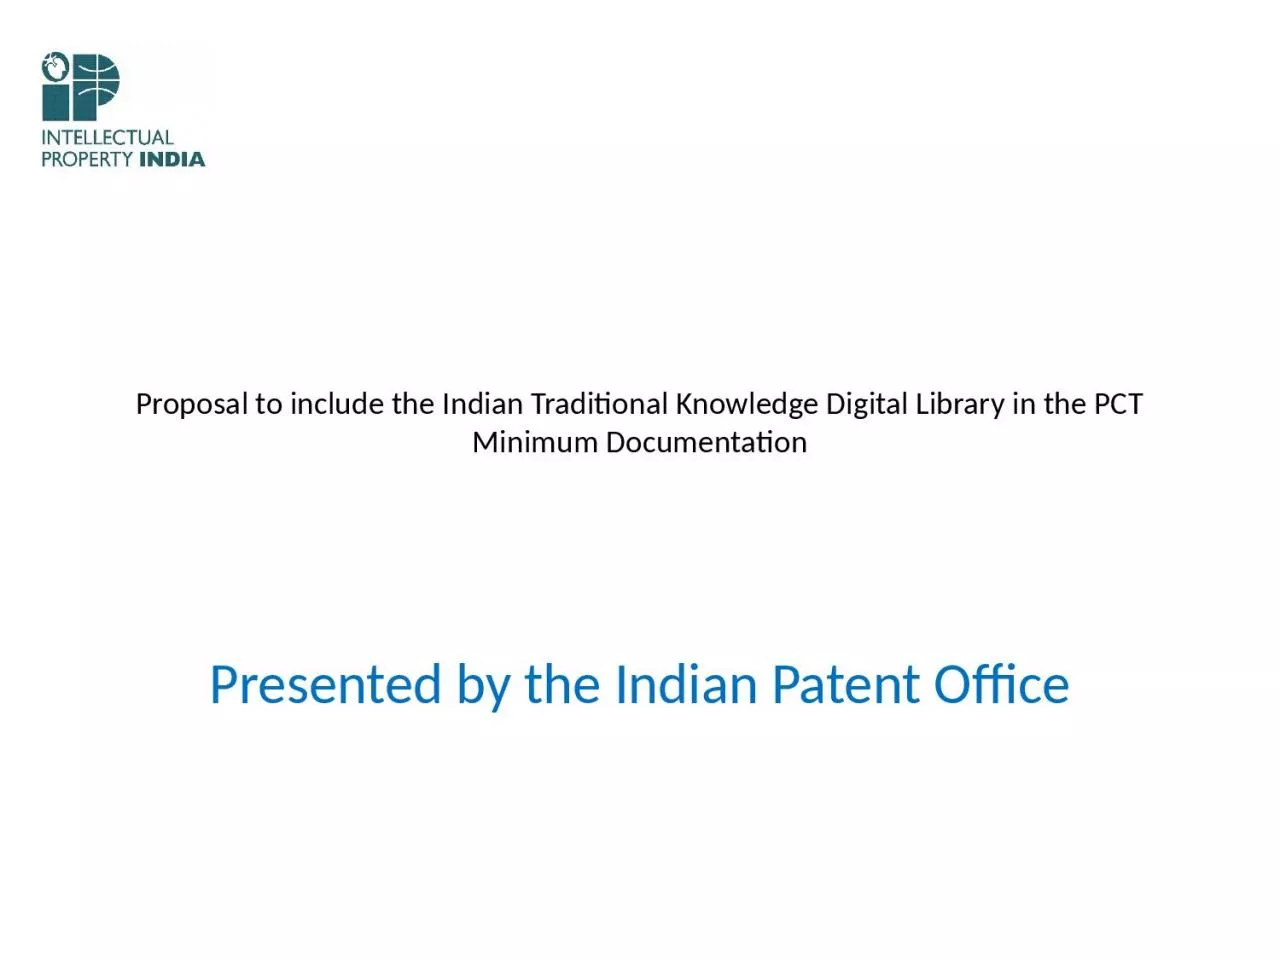 Proposal to include the Indian Traditional Knowledge Digital Library in the PCT Minimum